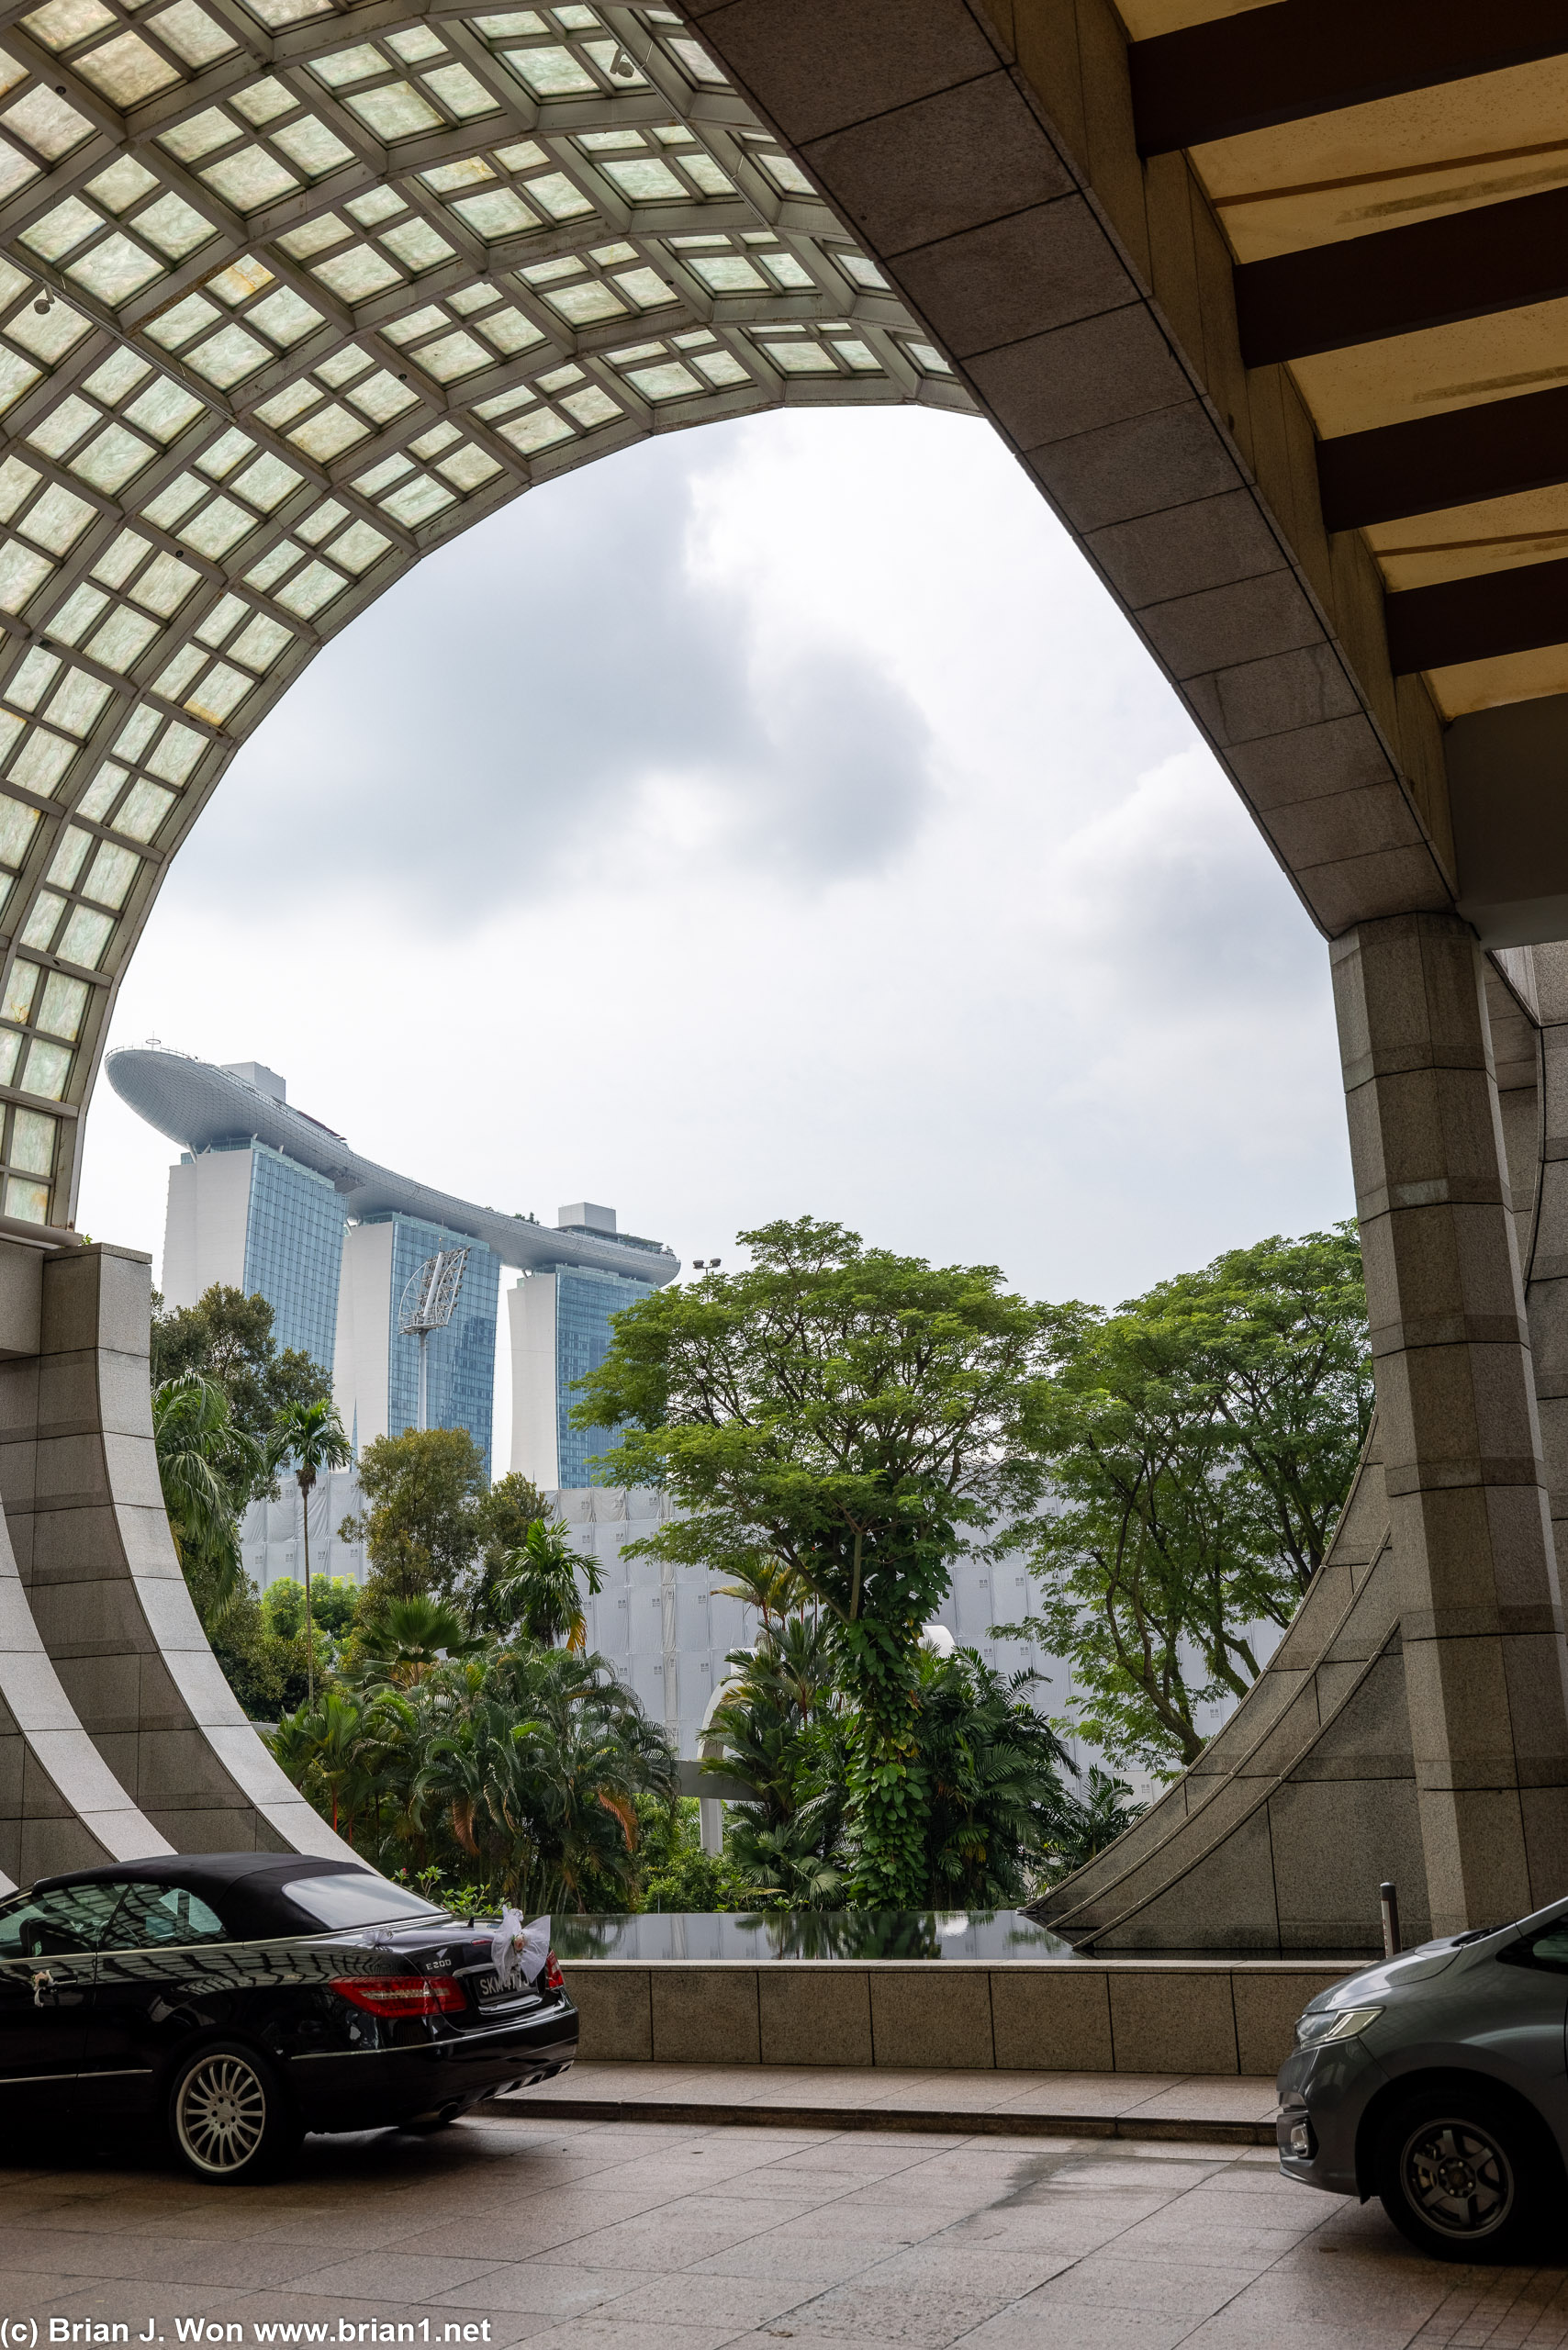 View of Marina Bay Sands from the driveway of the Ritz.